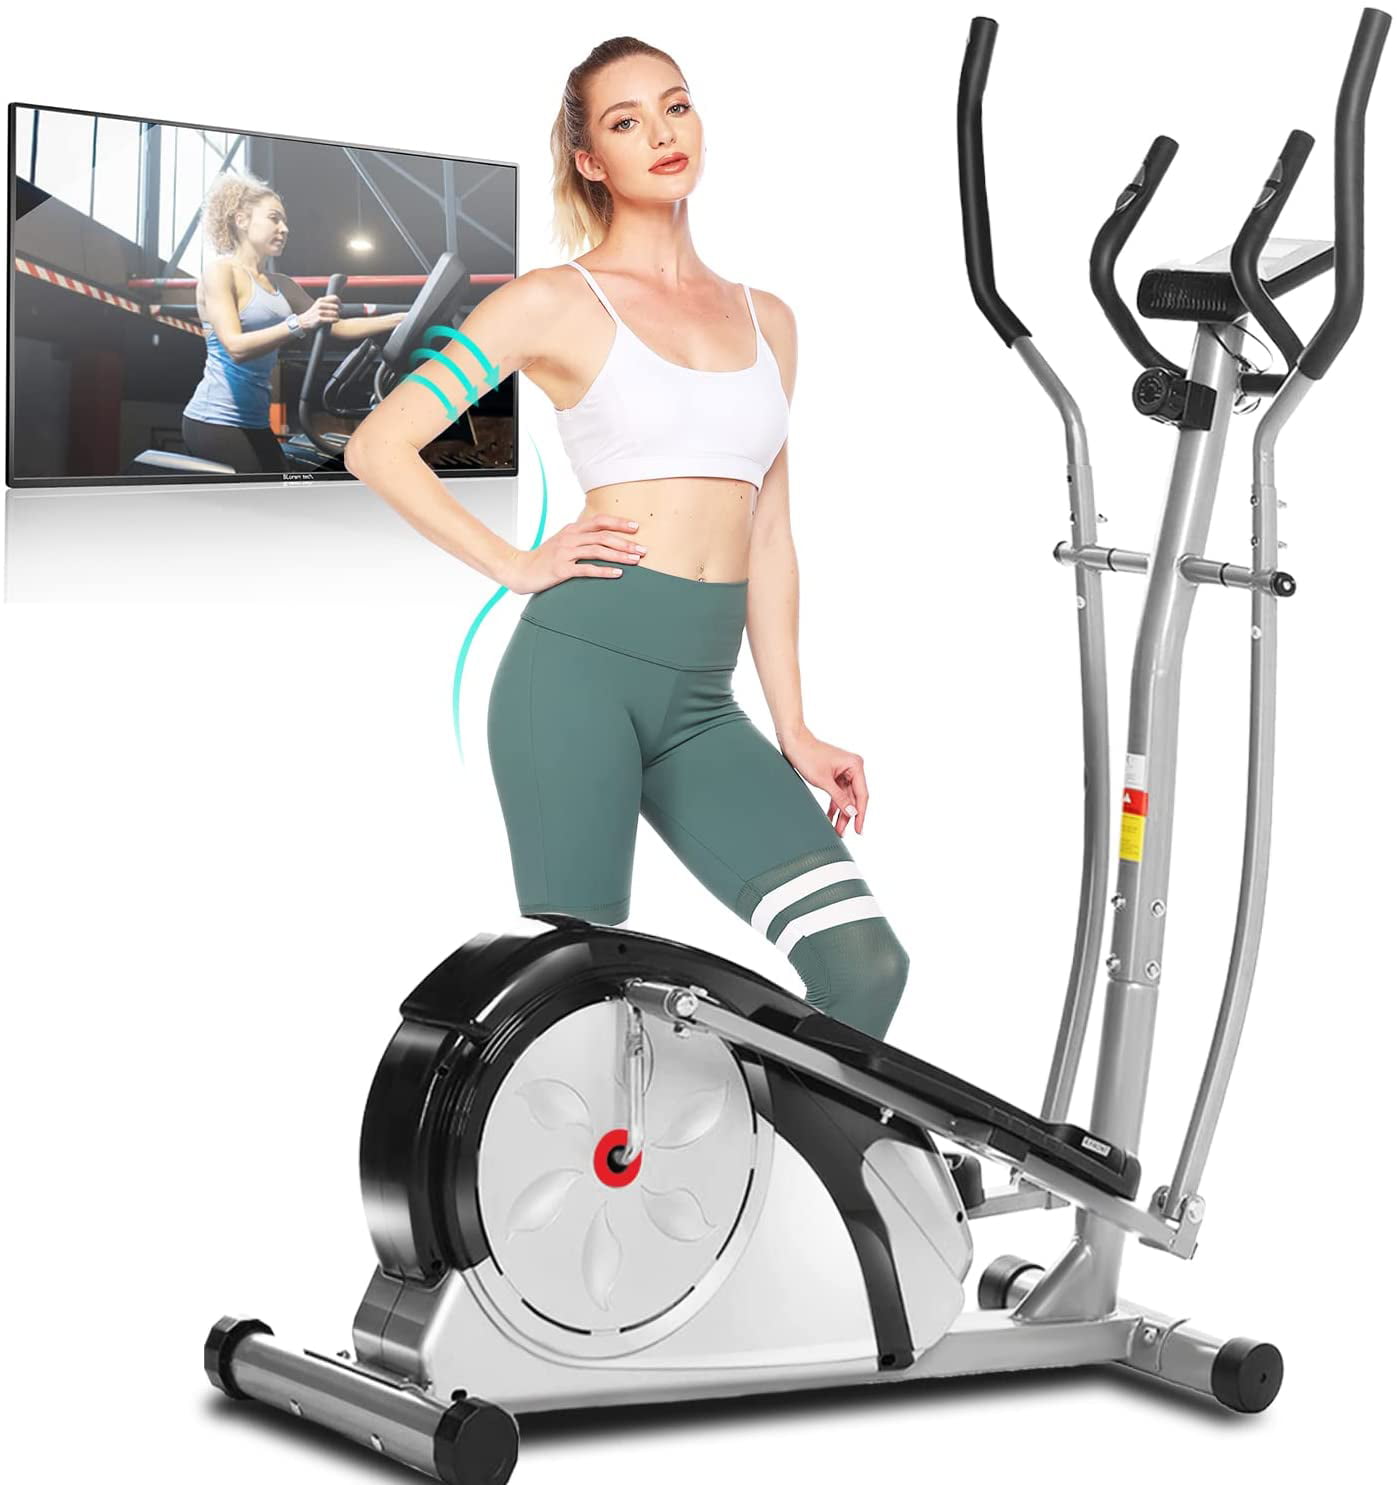 Ancheer Elliptical Exercise Workout Machine pedal Trainer Bike In-house Delivery 